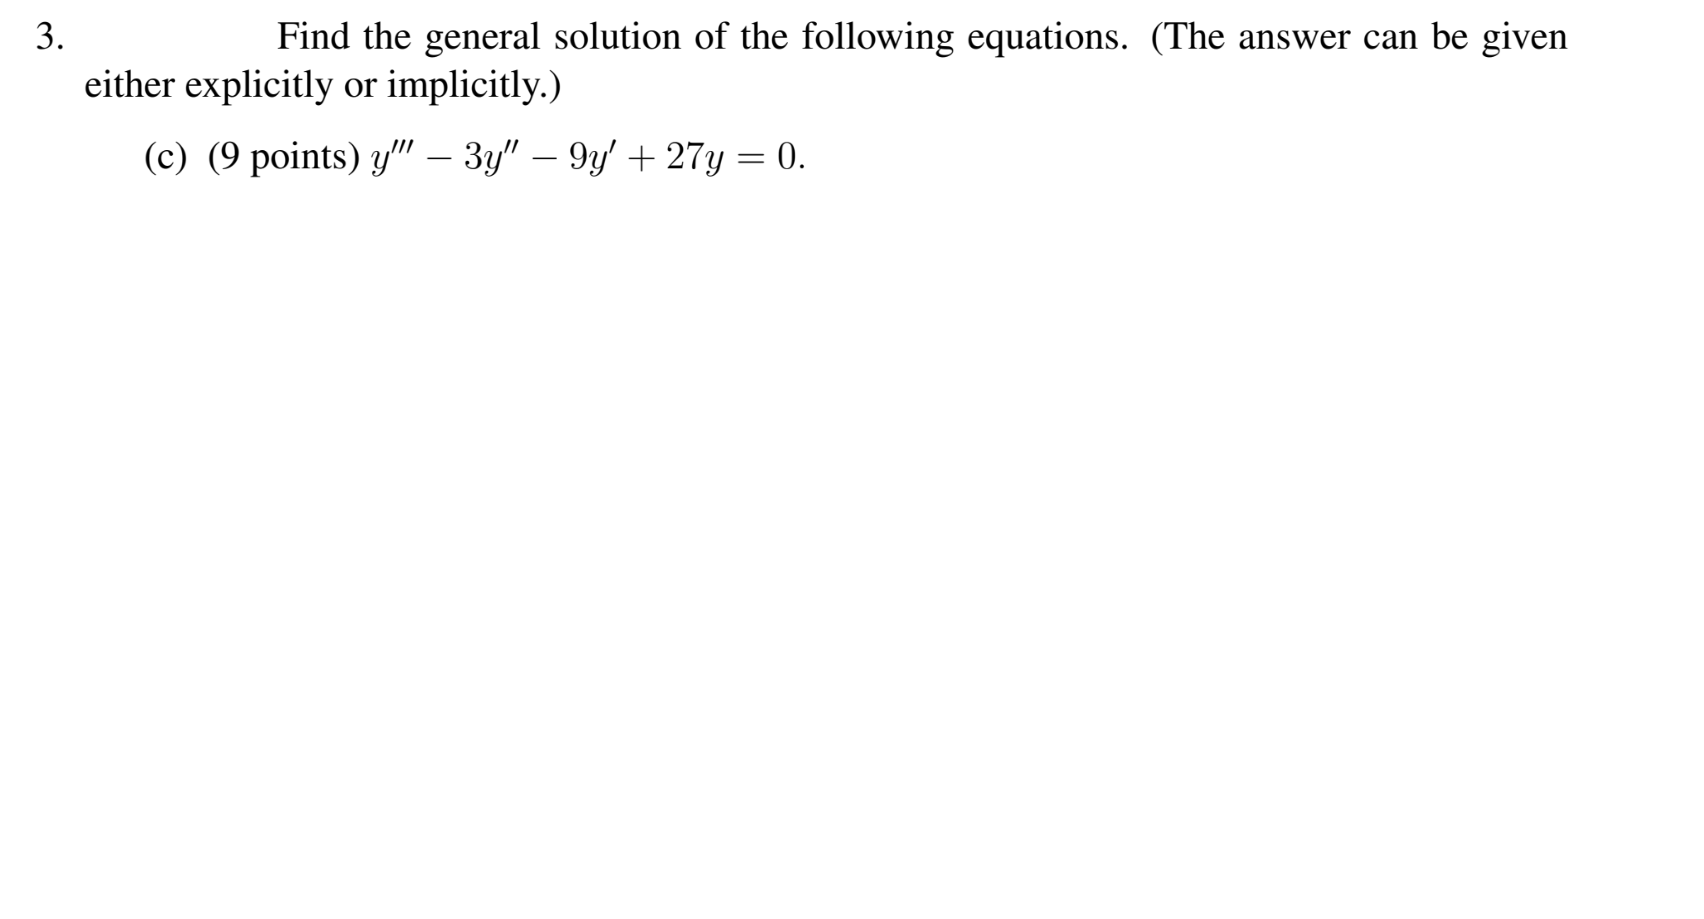 Find the general solution of the following equations. (The answer can be given
· explicitly or implicitly.)
:) (9 points) y" – 3y" – 9y' + 27y = 0.
-
